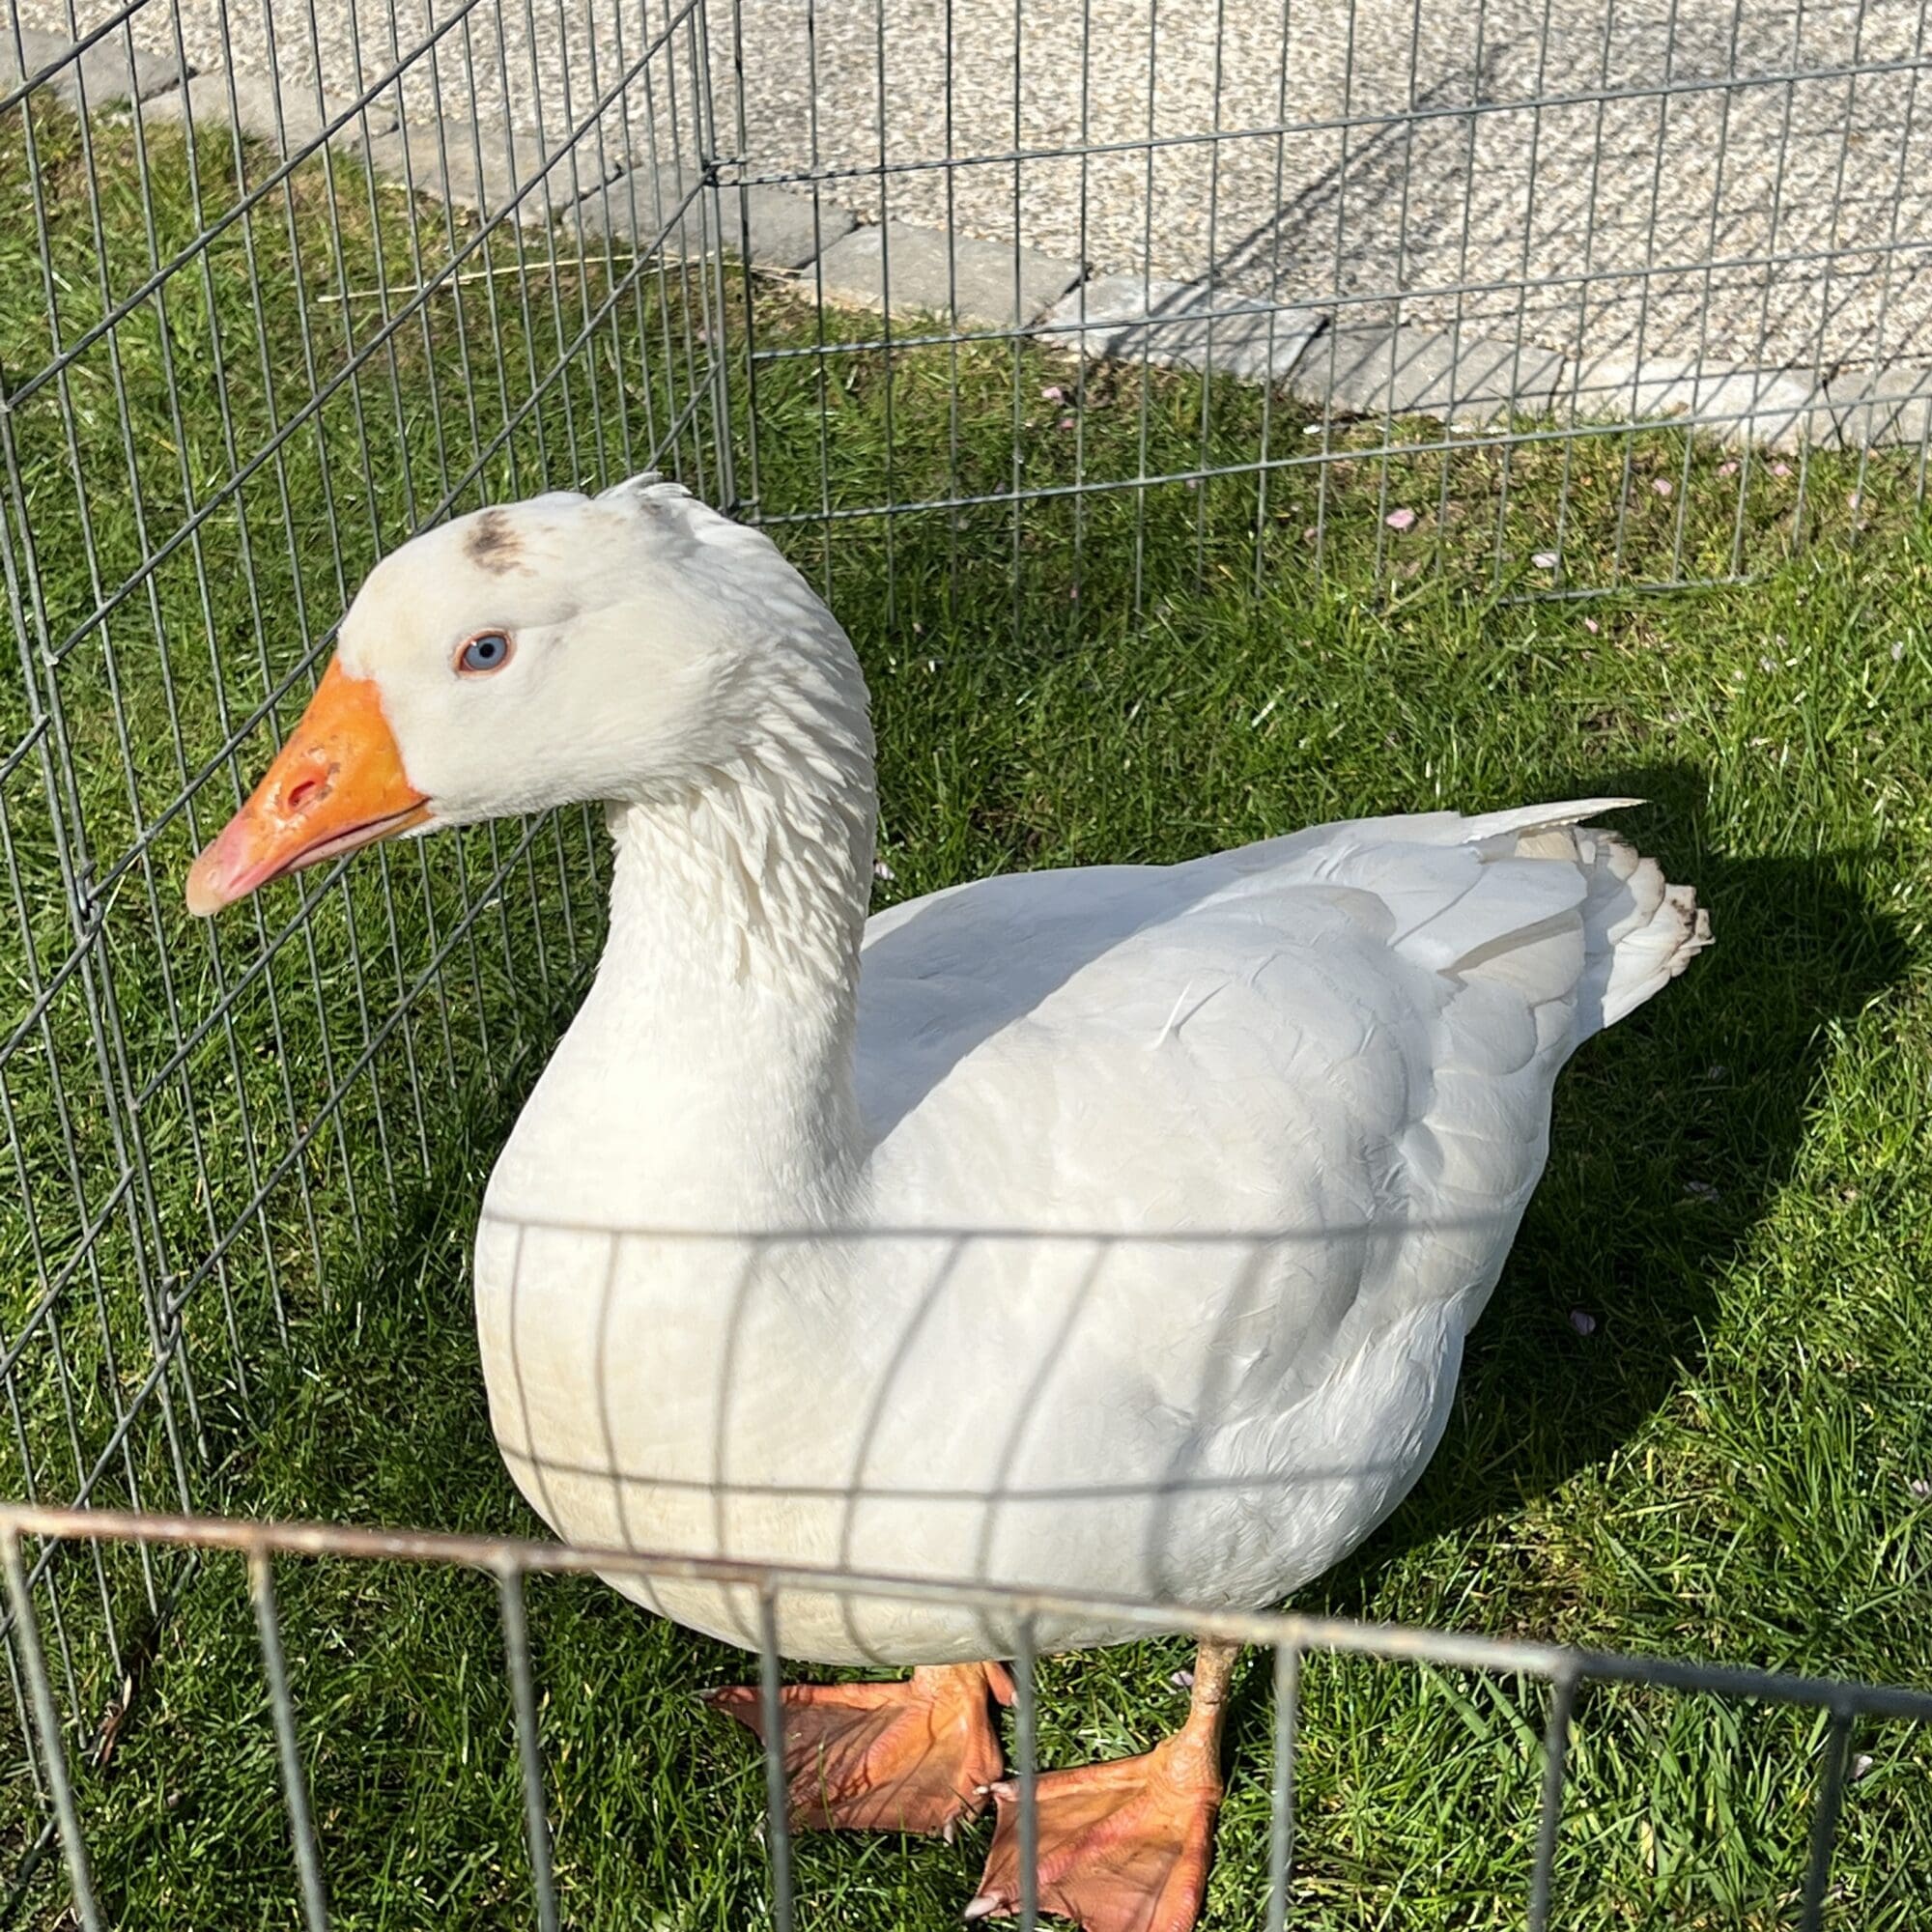 a picture of a goose